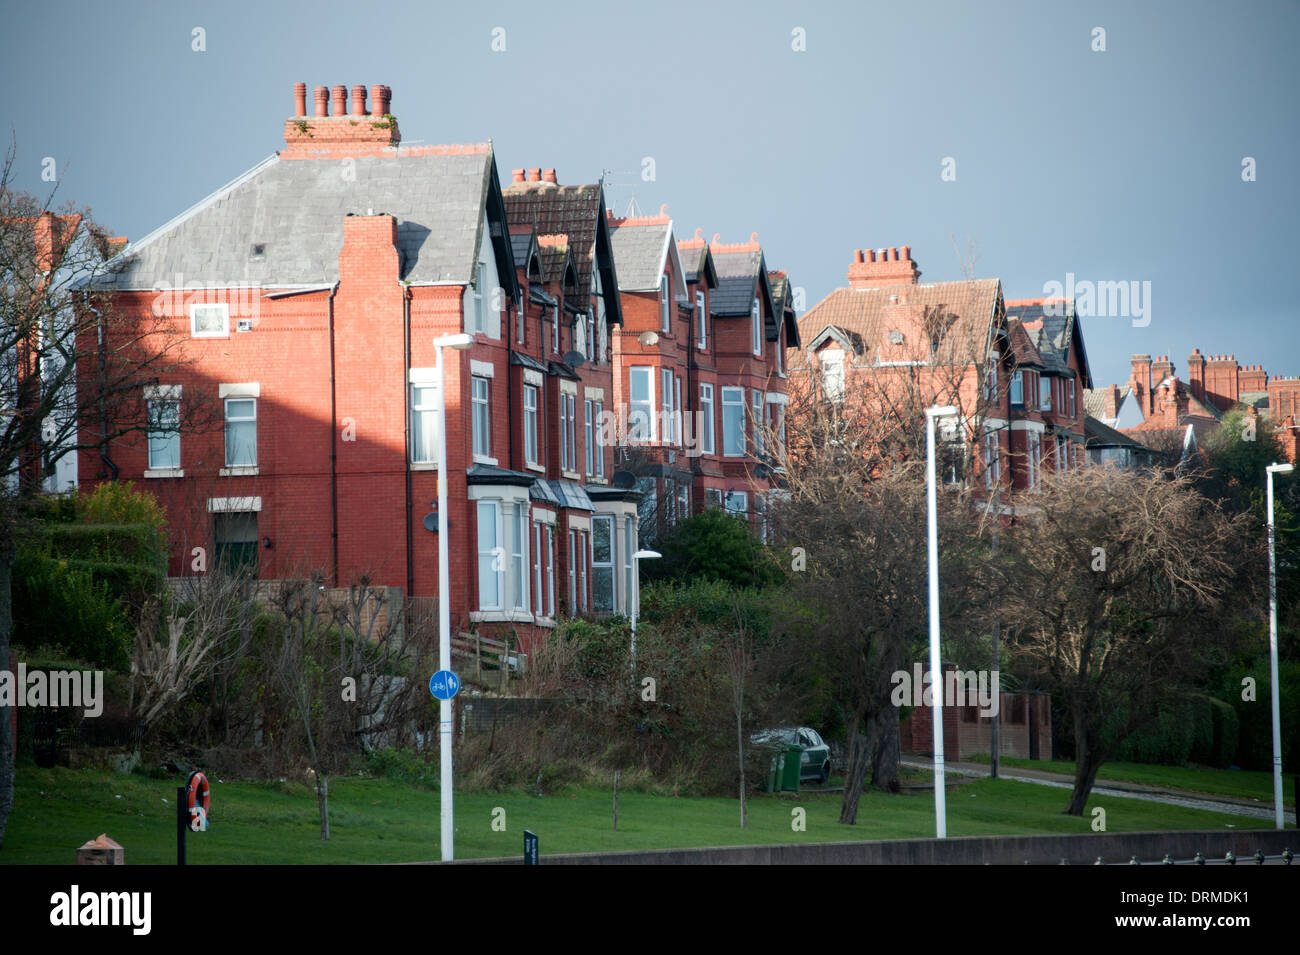 Large houses high up on embankment subsidence risk Stock Photo